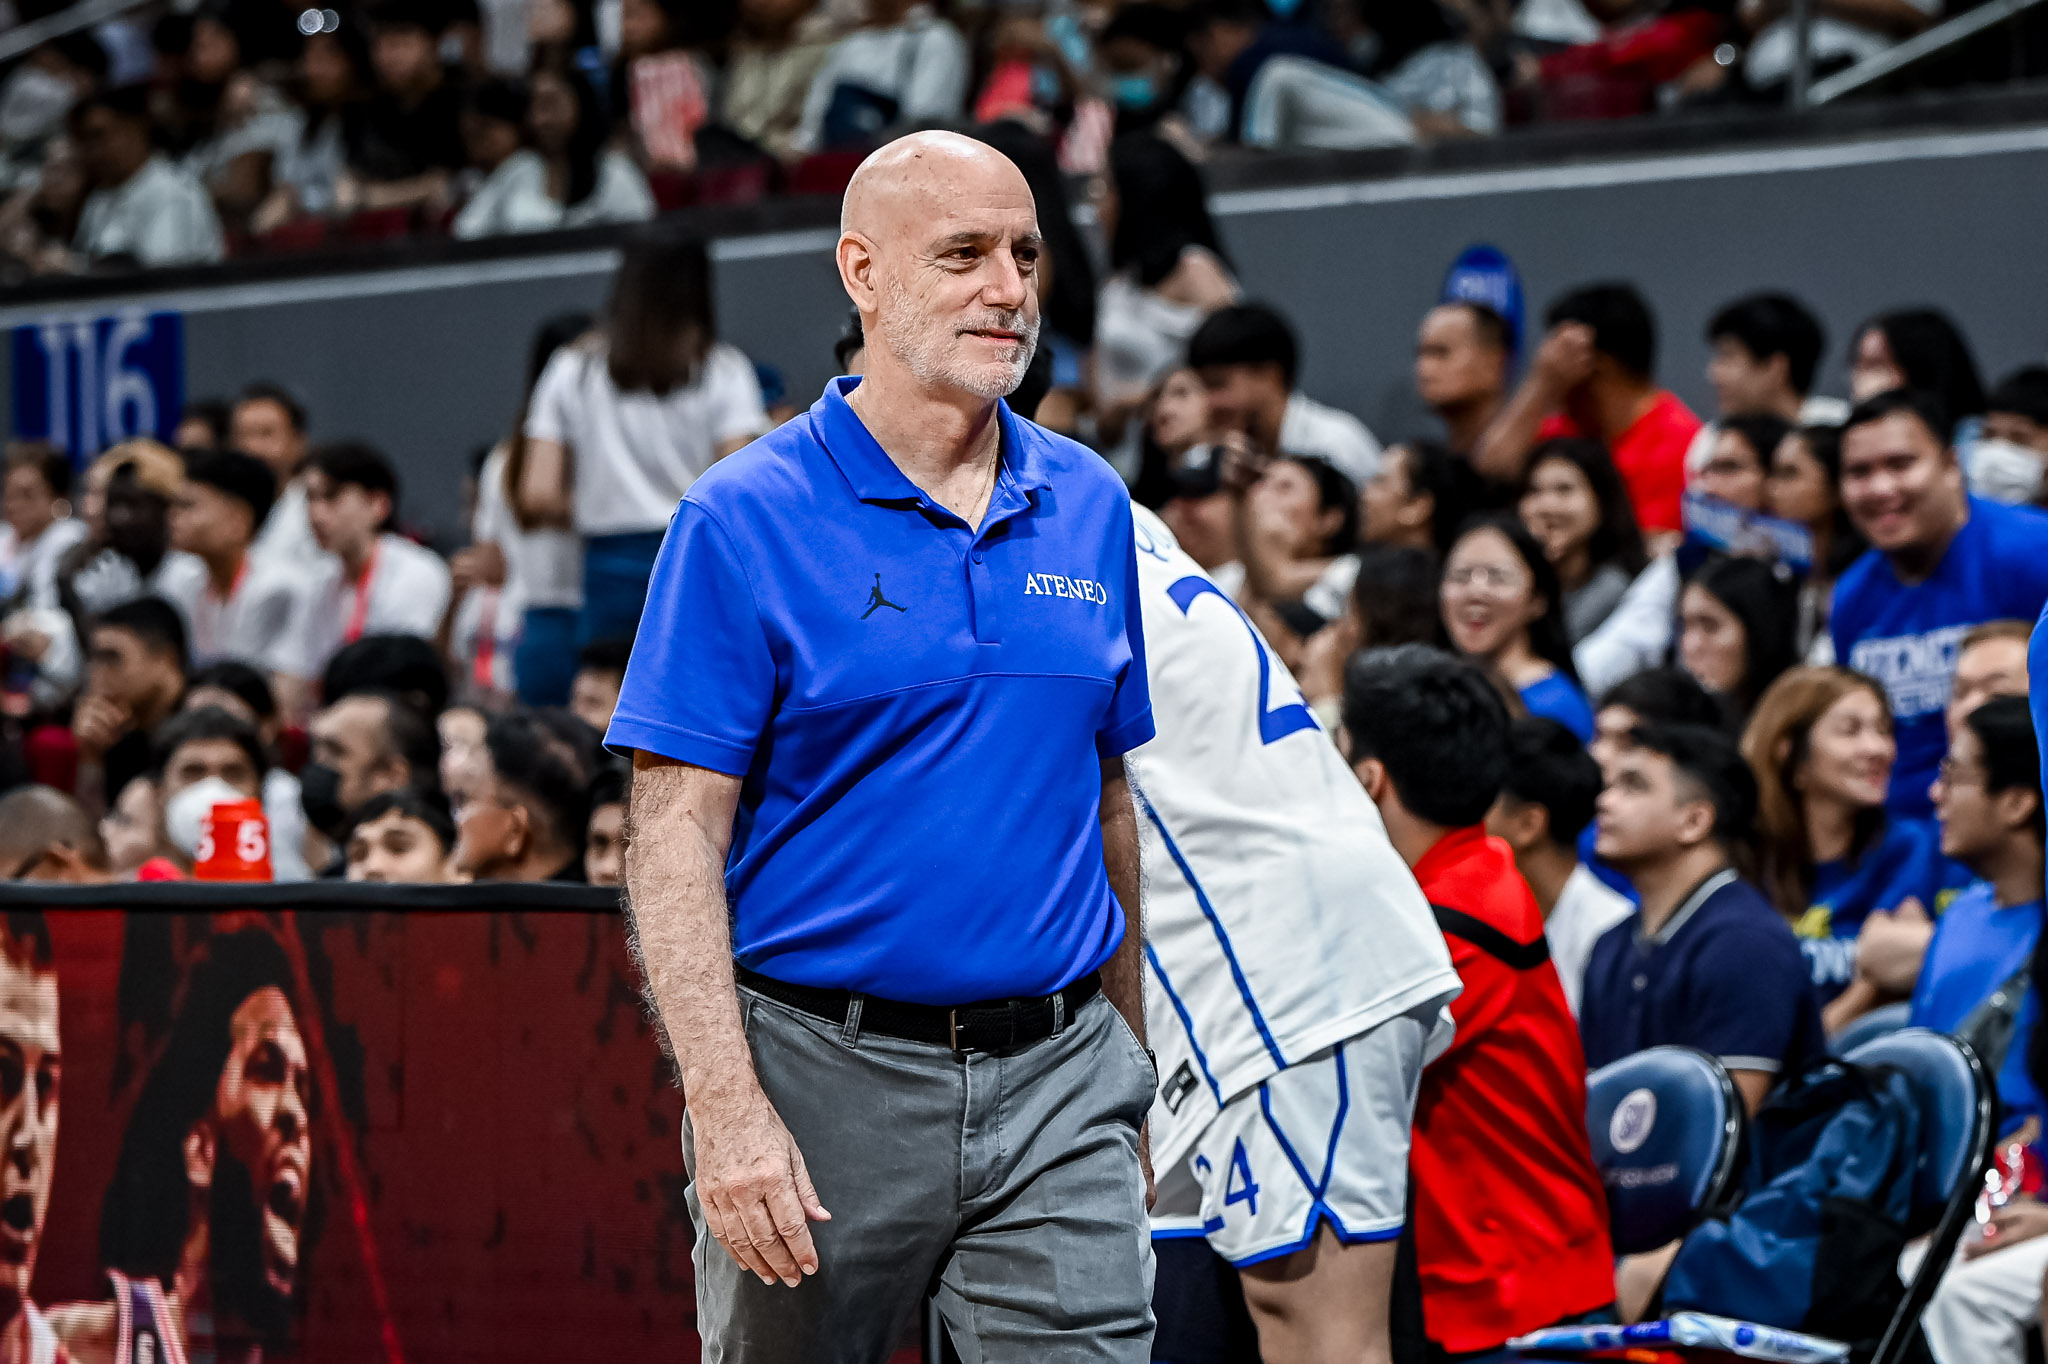 UAAP86-MBB-ATENEO-vs-ADU-HC-TAB-BALDWIN-7014 Jared Brown finds redemption in most opportune time for Ateneo ADMU Basketball News UAAP  - philippine sports news